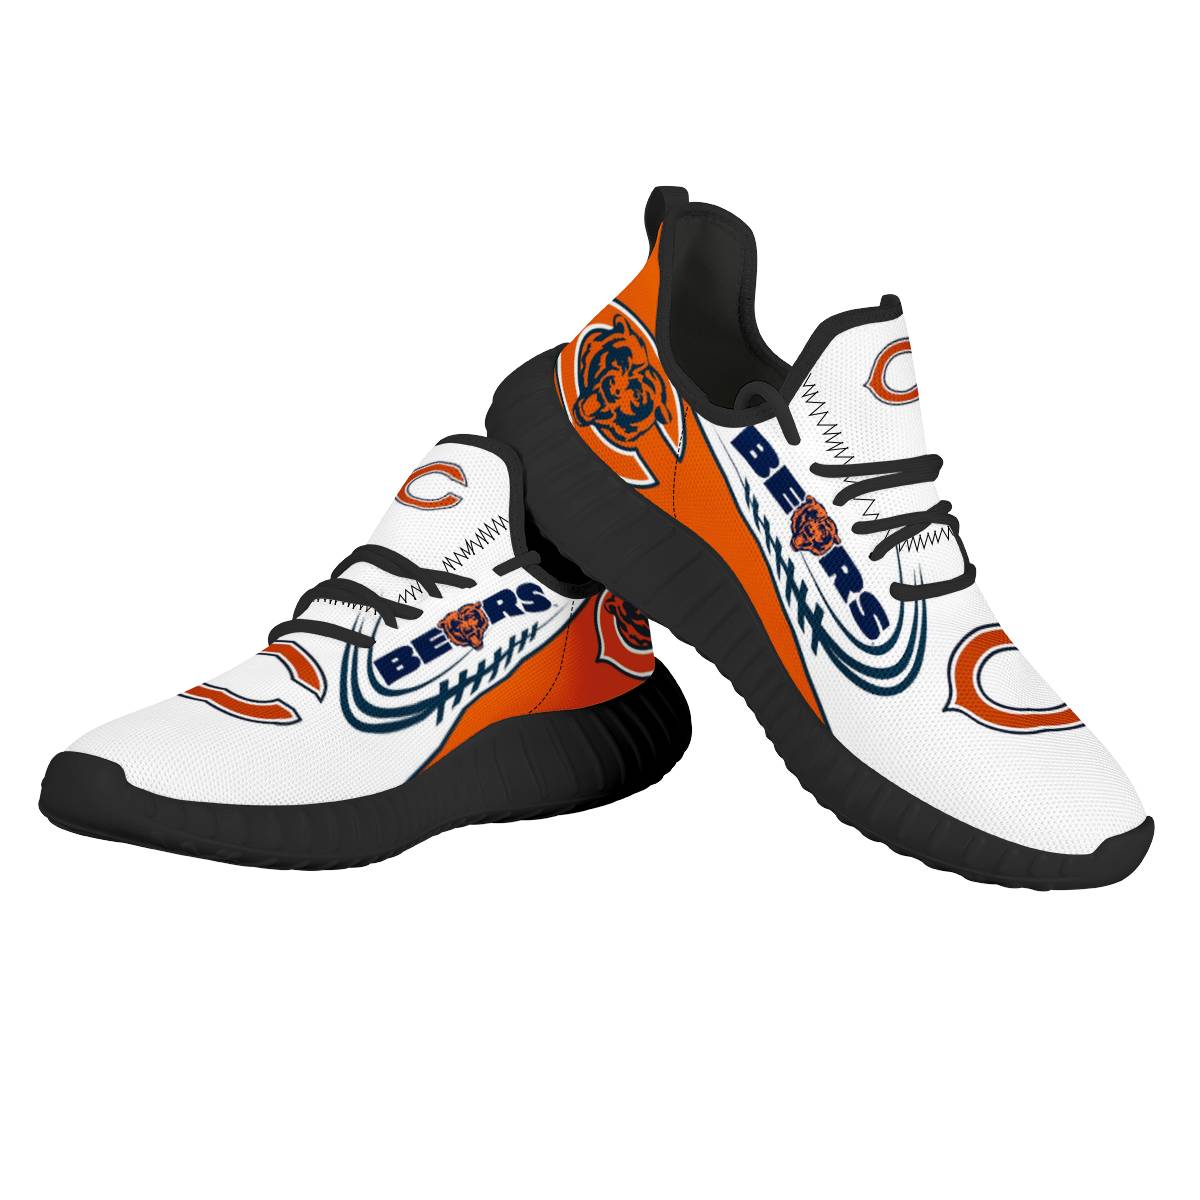 Men's Chicago Bears Mesh Knit Sneakers/Shoes 009